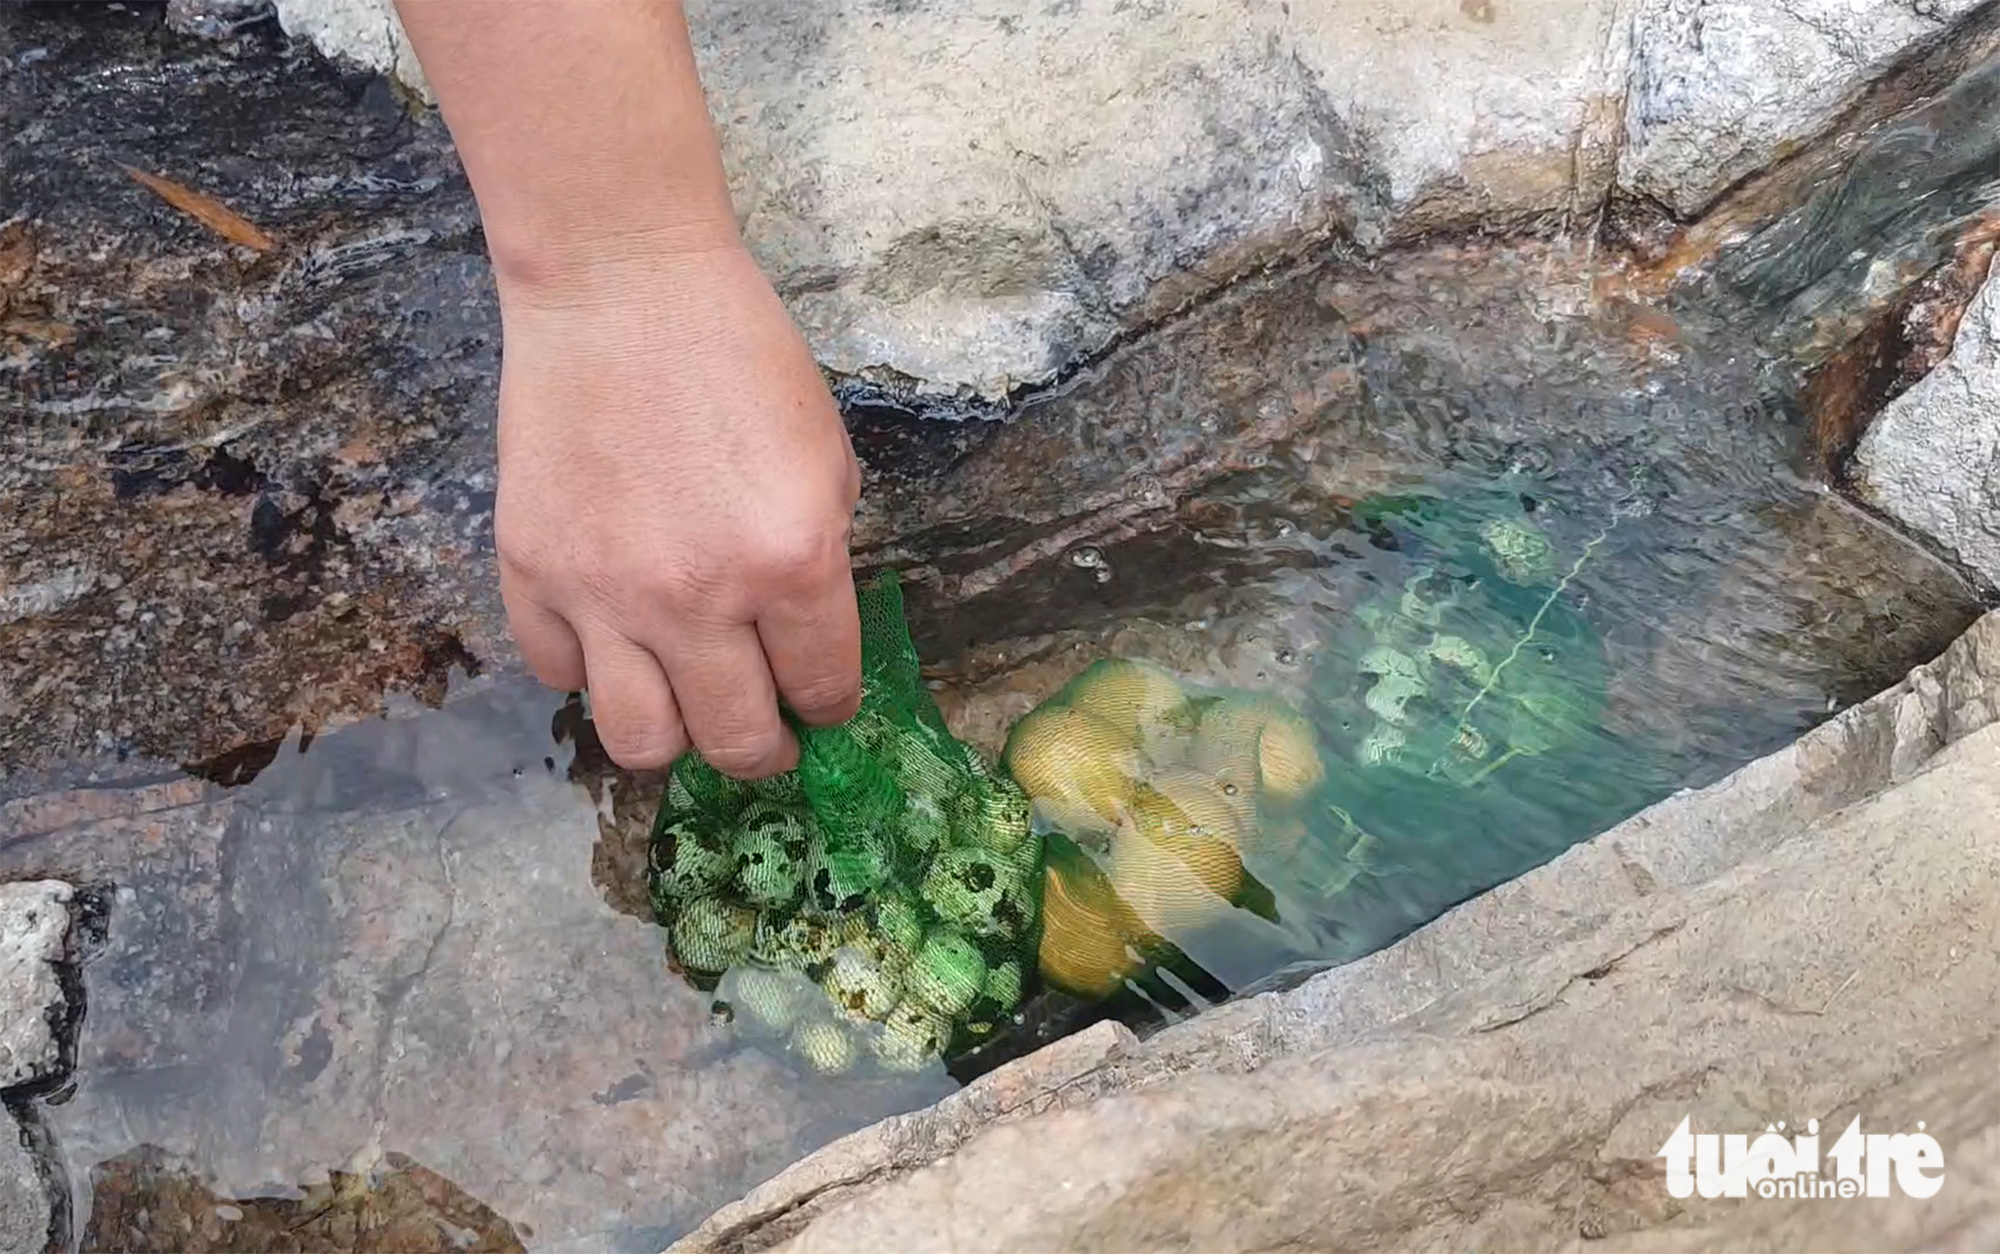 Eggs take just 10-15 minutes to cook in the hot spring.